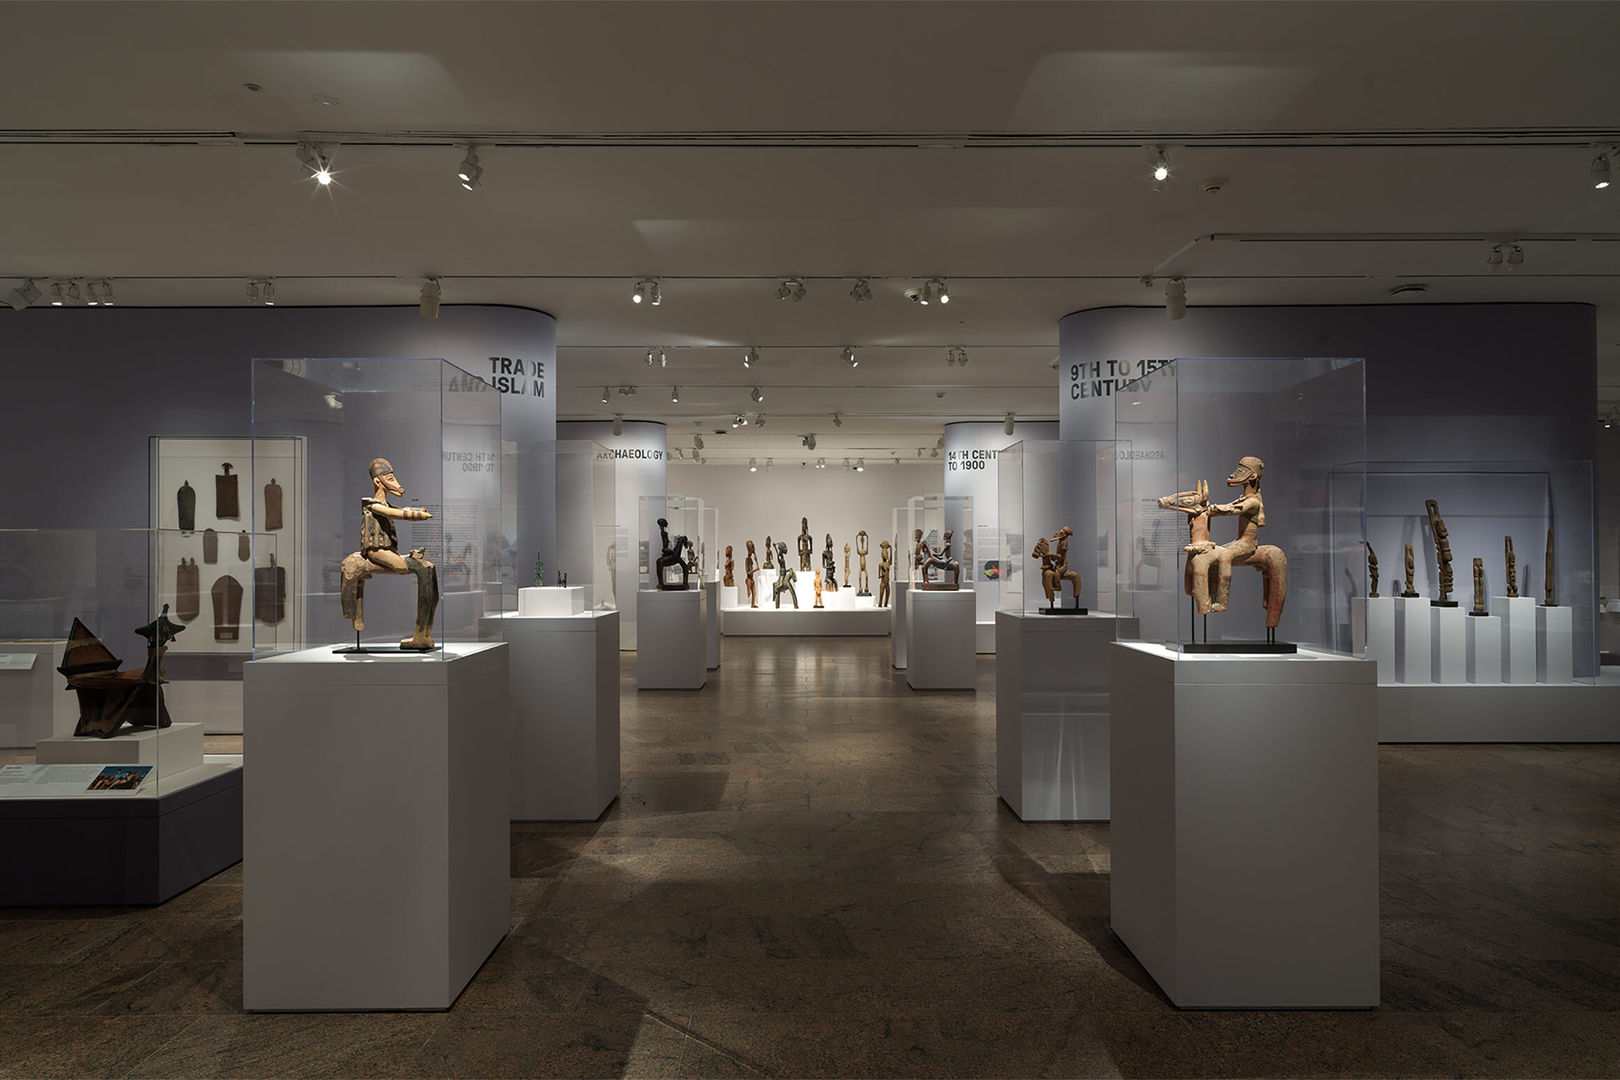 Two rows of wooden figurines on display stretch across the room into a vanishing point of a white platform showcasing similar objects.